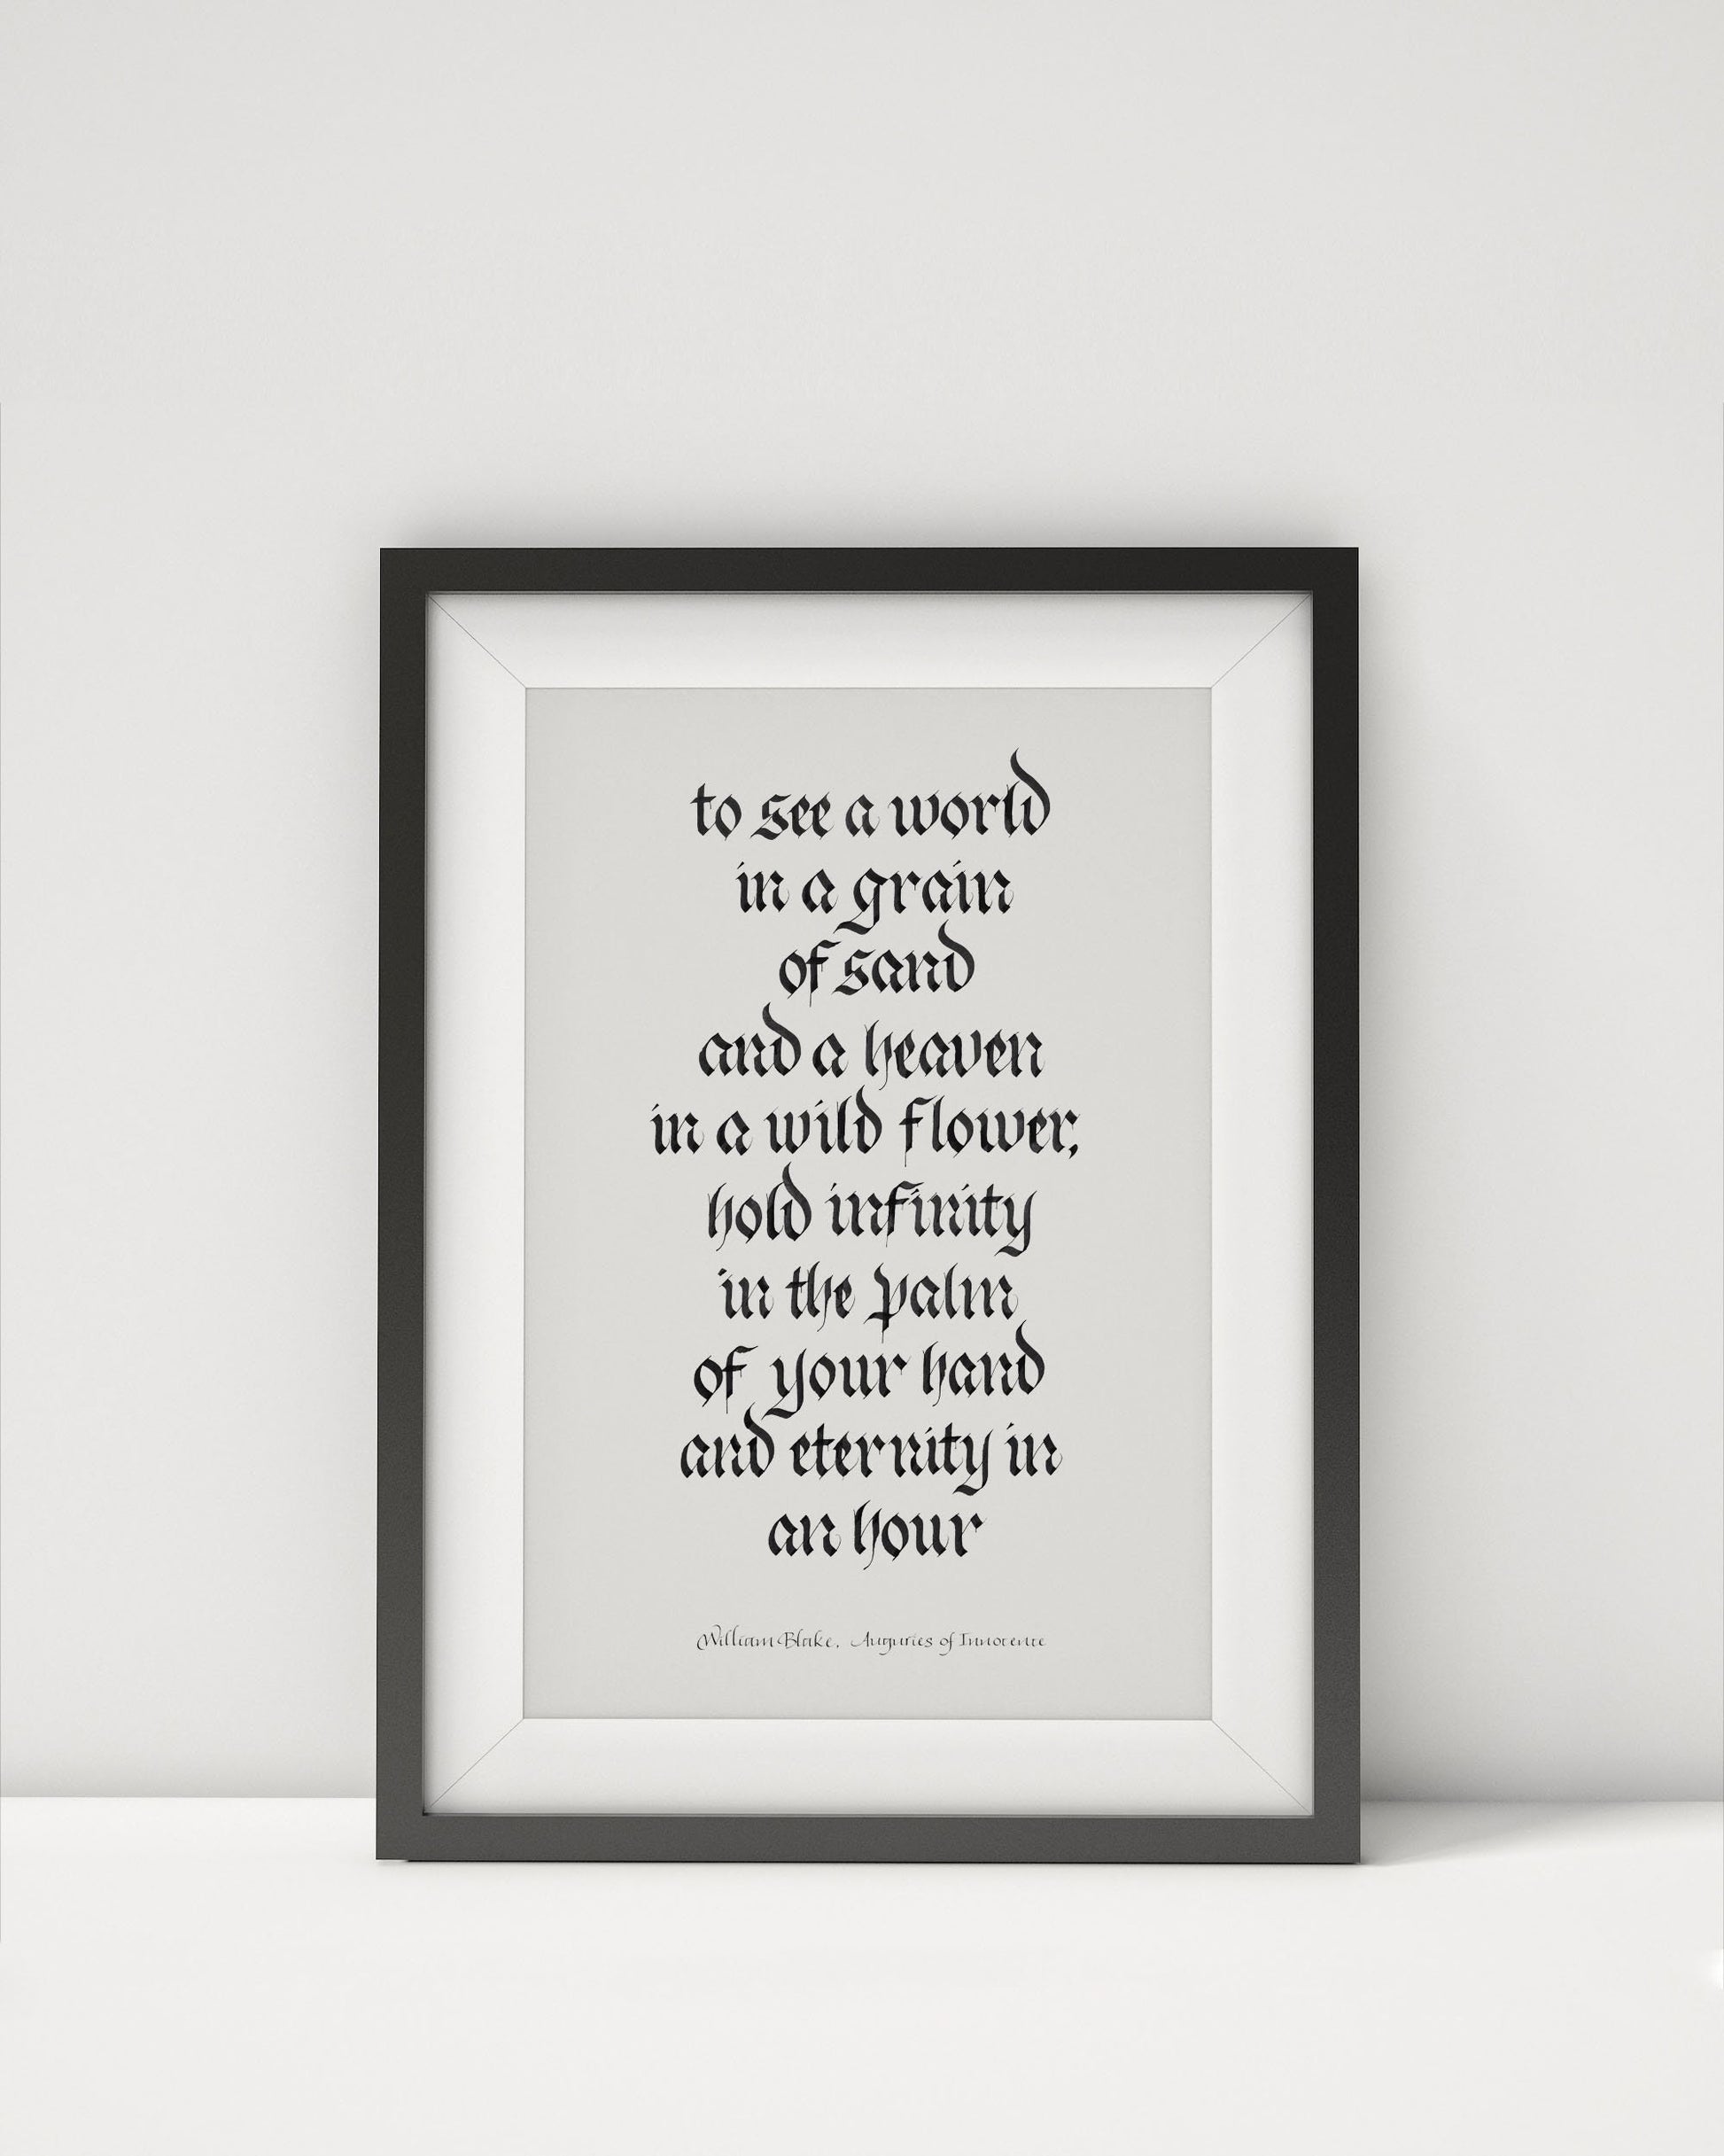 William Blake Framed quote print, Auguries of Innocence in Calligraphy - To see a world in a grain of sand - Book Quote Prints